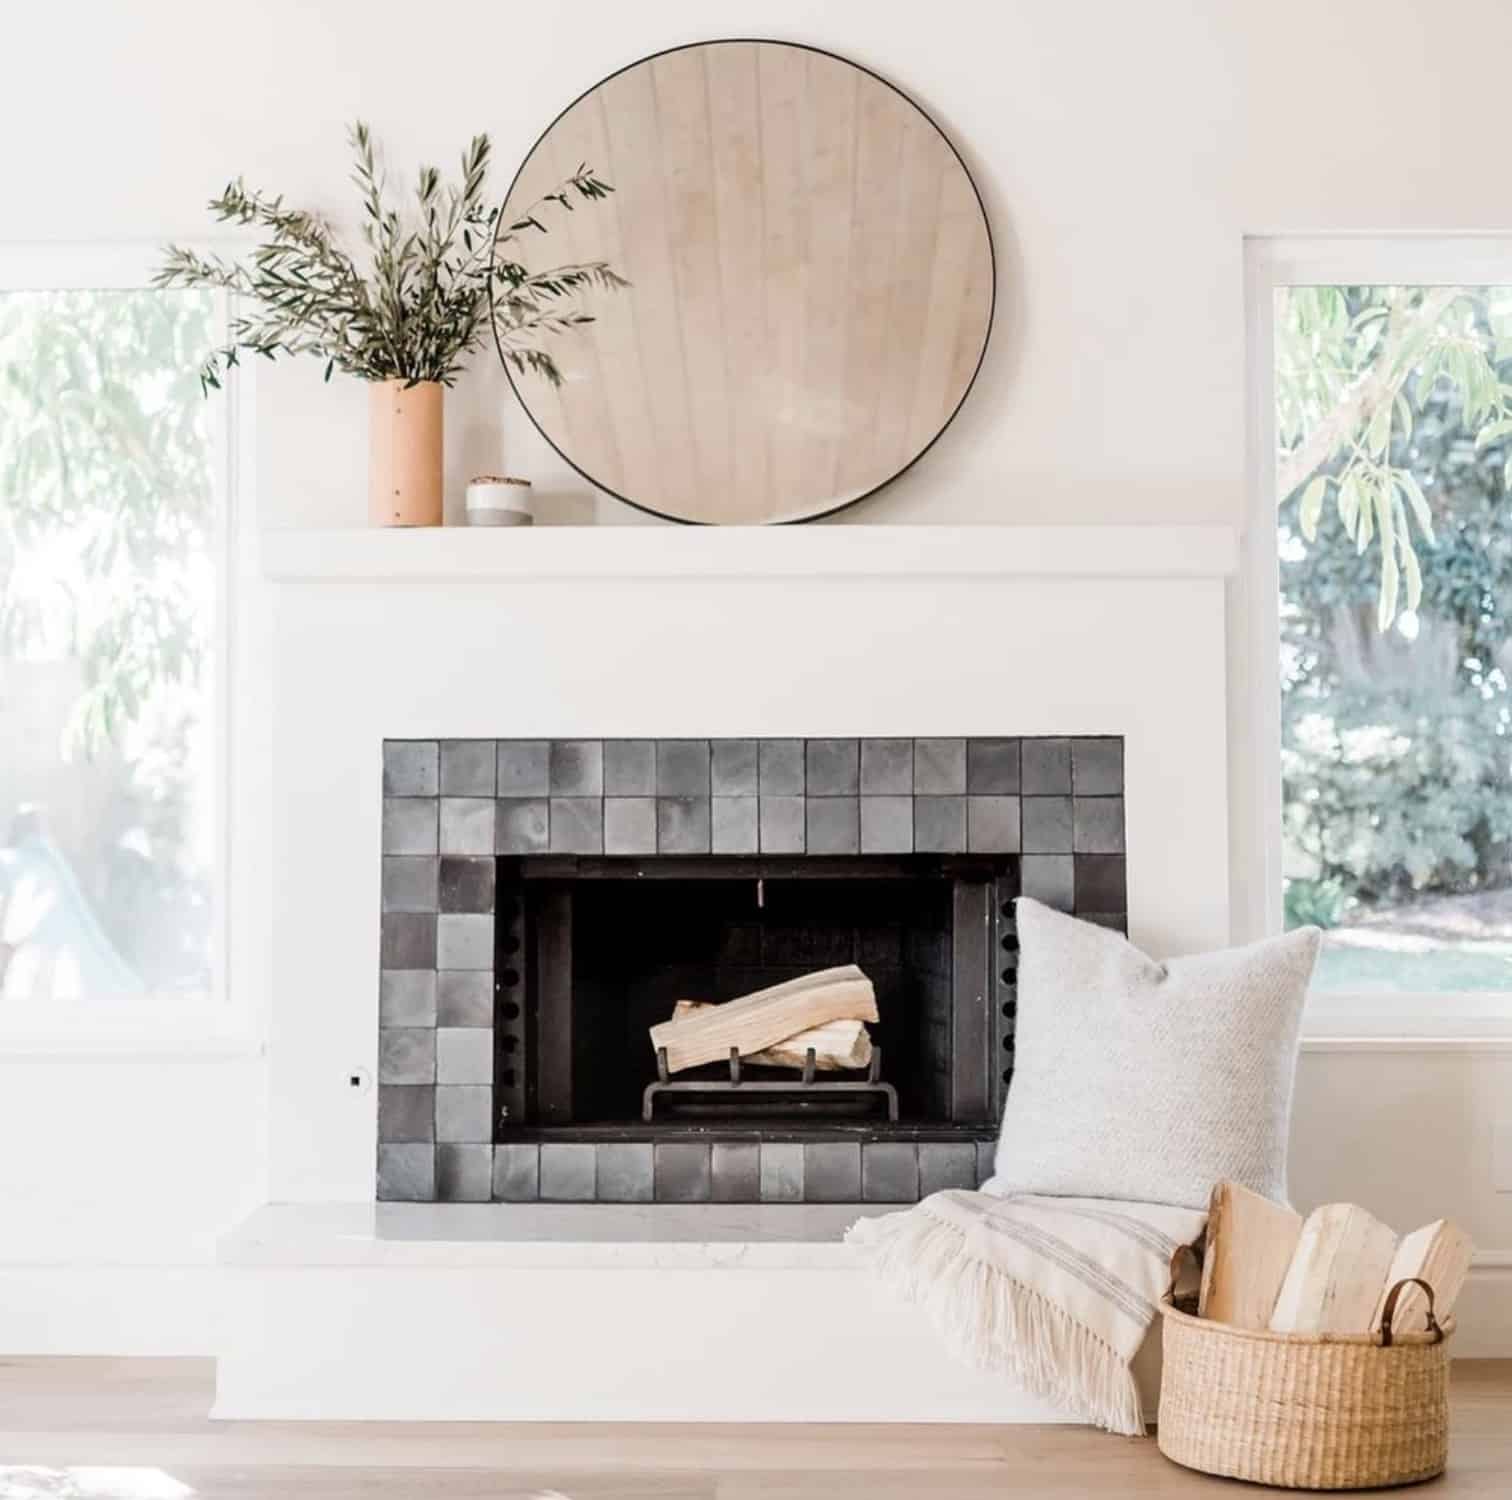 20 Easy Fireplace Tile Ideas To Remodel, Fireplace Ceramic Tile Ideas